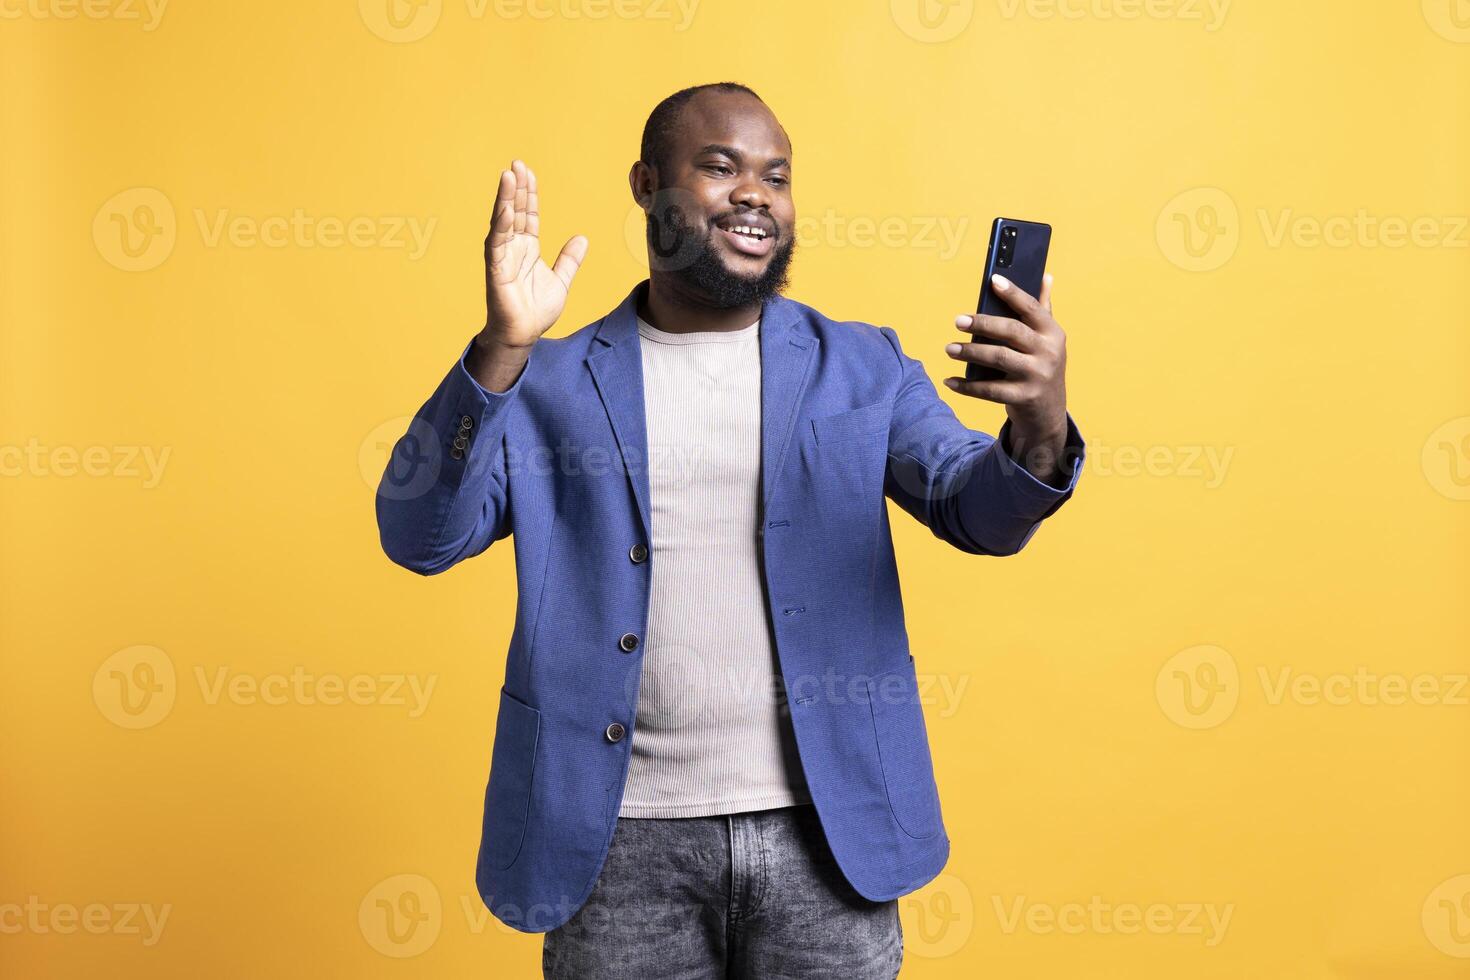 Smiling man having friendly conversation with friends during teleconference meeting using smartphone, studio background. BIPOC person having fun catching up with mates during online call photo